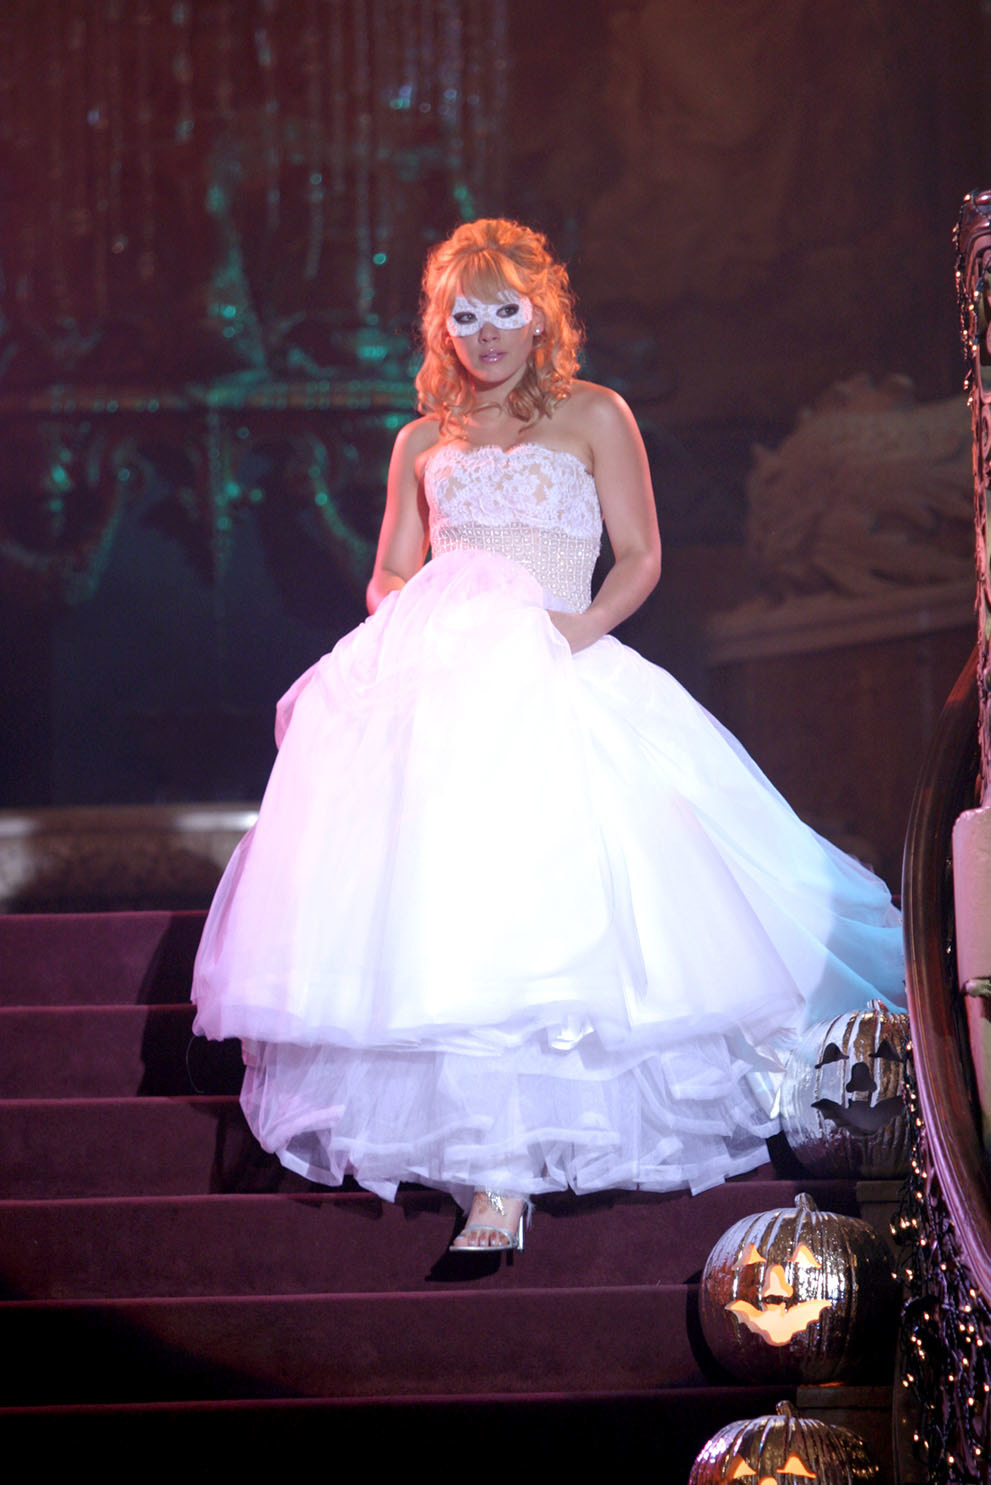 Andie enters the dance wearing a ballgown and a mask